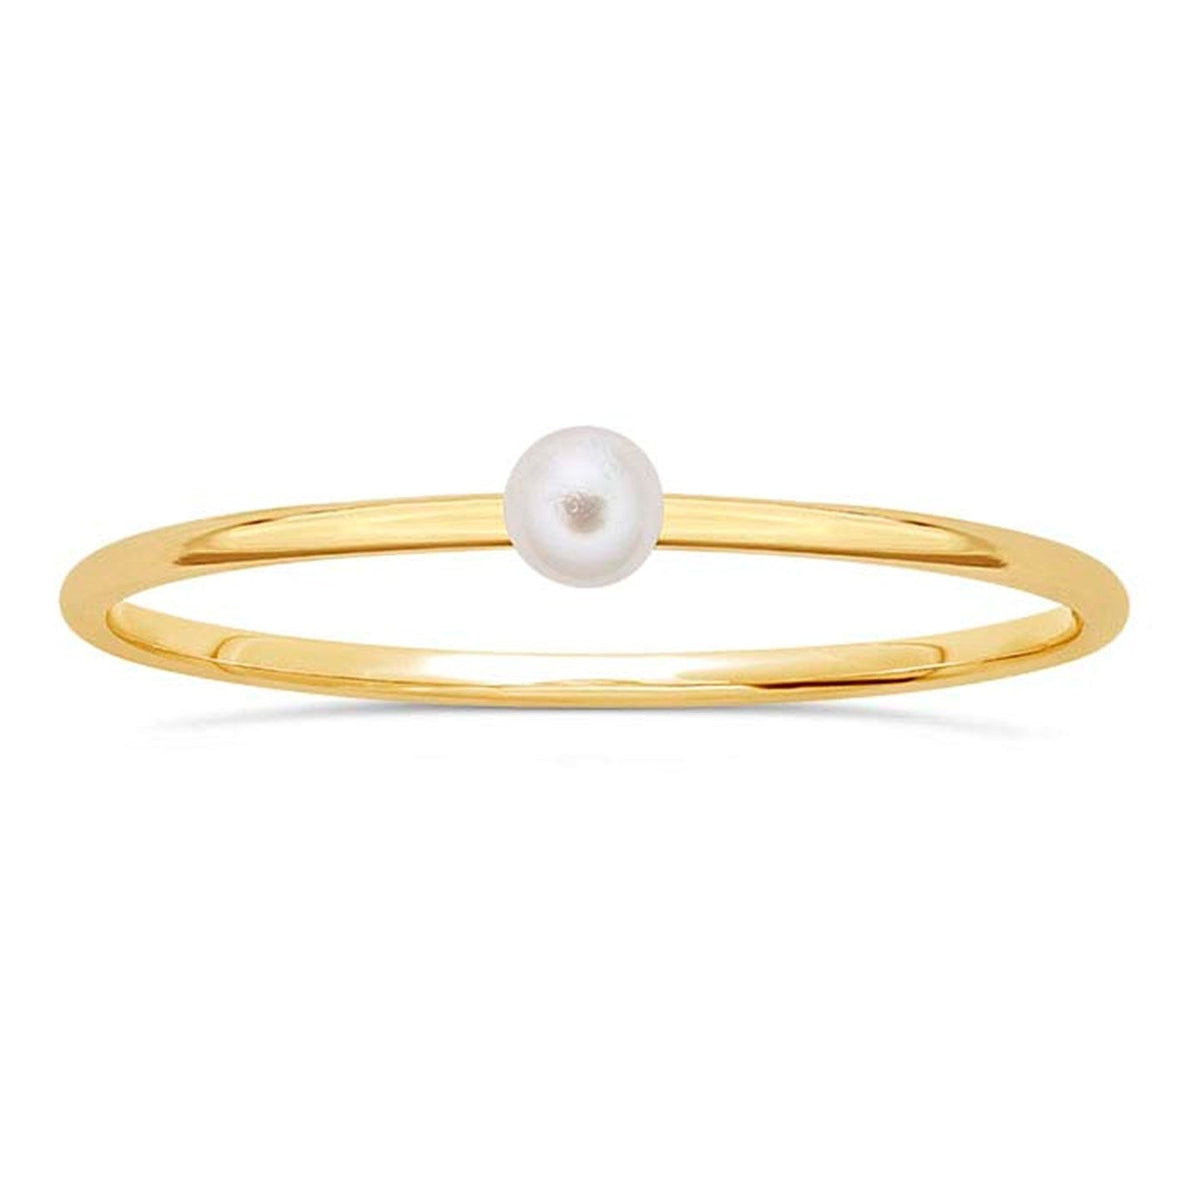 Gold Filled Stackable Ring with White Crystal Pearl